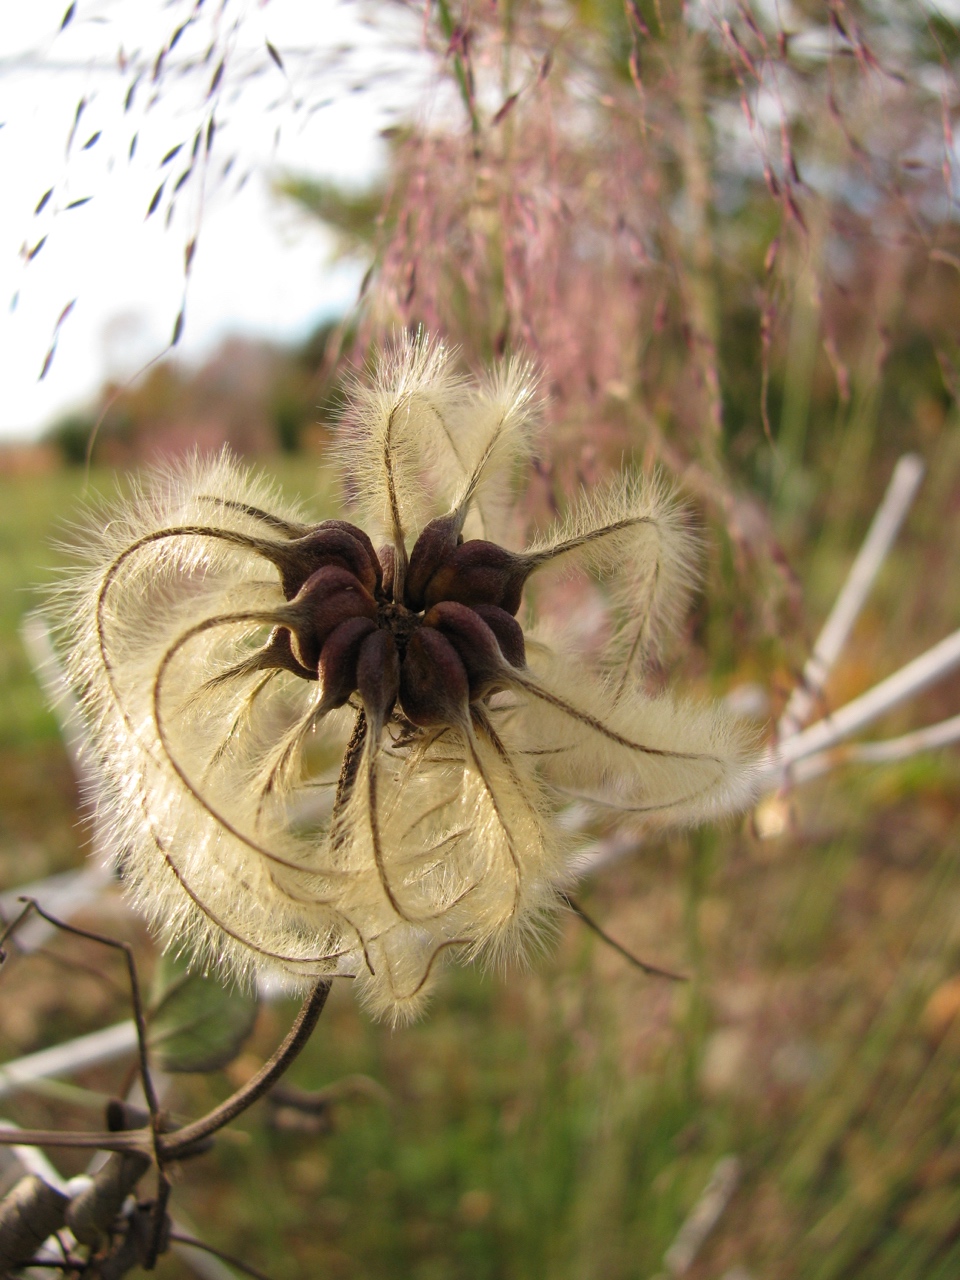 The Scientific Name is Clematis viorna. You will likely hear them called Leather Flower. This picture shows the Mature achenes with fuzzy plumes of Clematis viorna